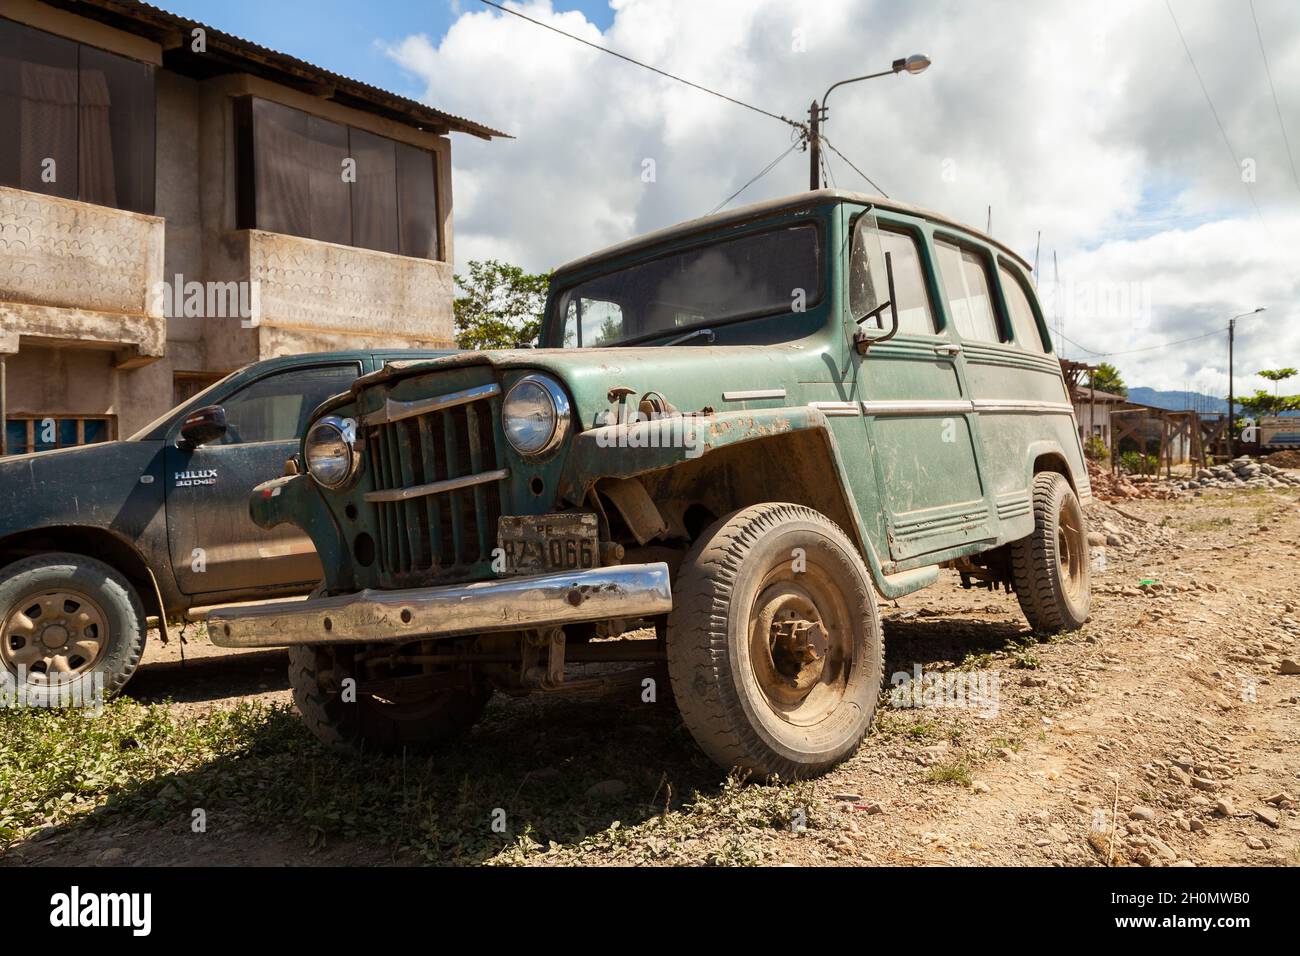 Pilcopata, Peru - April 12, 2014: An old off-road vehicle of green color, parked in one of the streets of the small town of Pilcopata Stock Photo